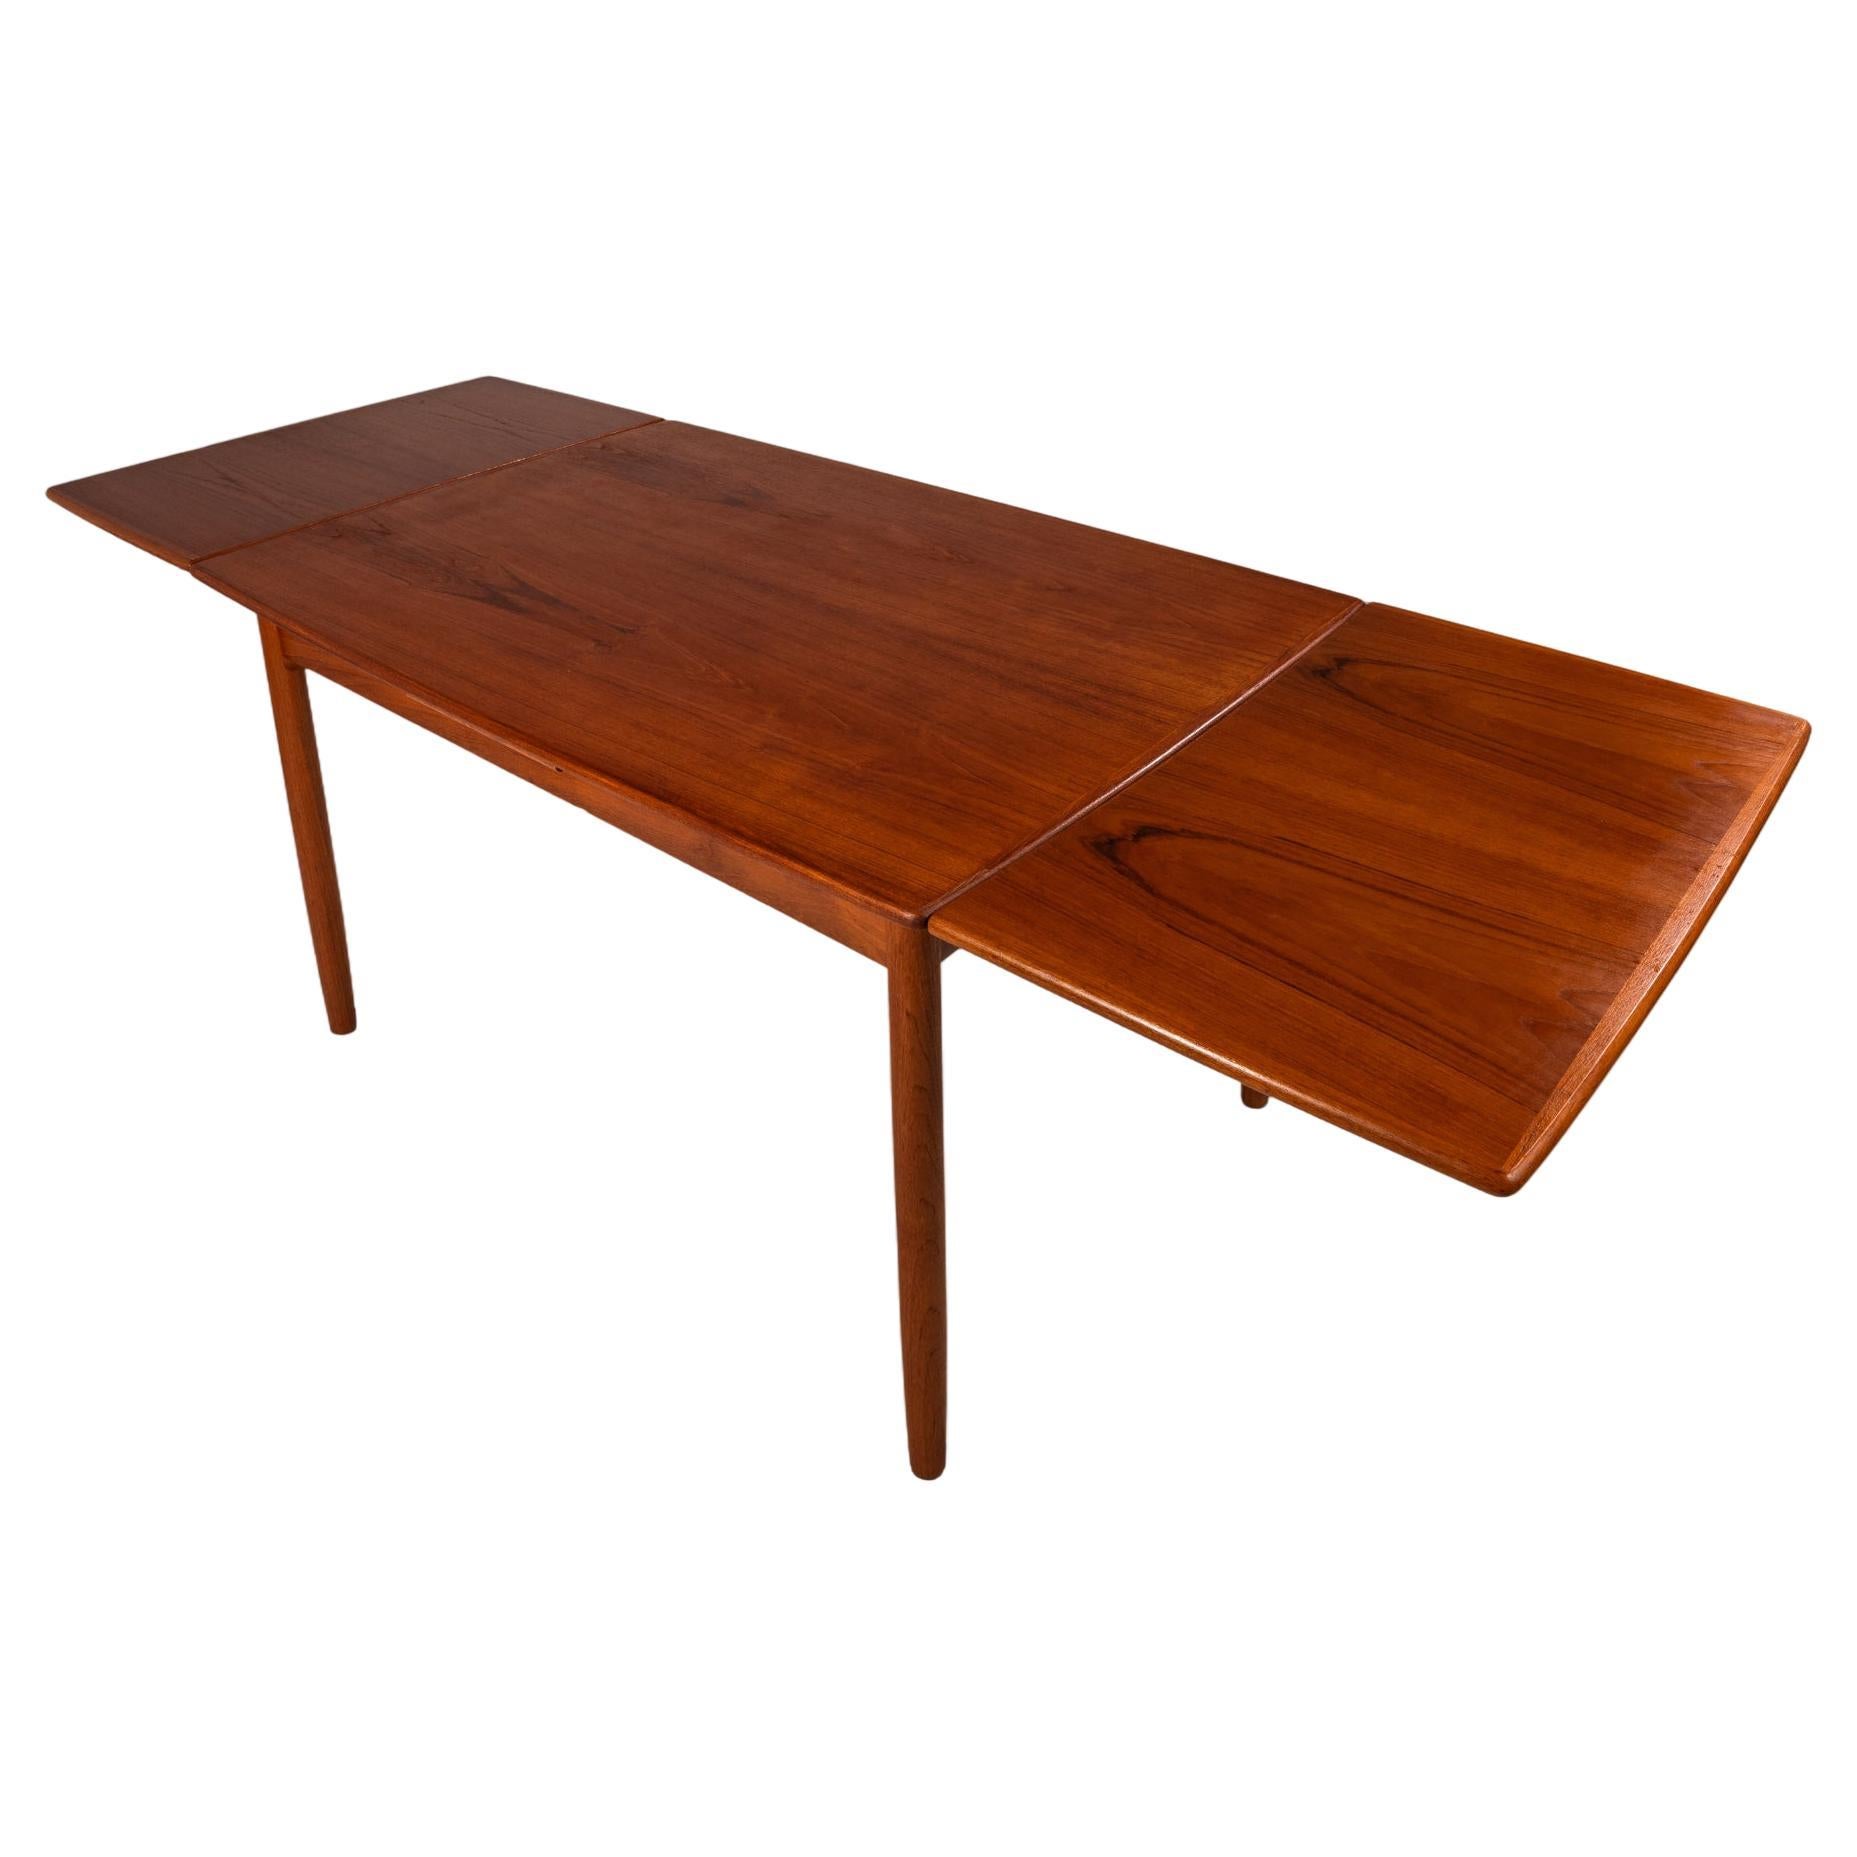 Danish Modern Expansion Dining Table in Teak w/ Stow-In-Table Leaves, c. 1960s For Sale